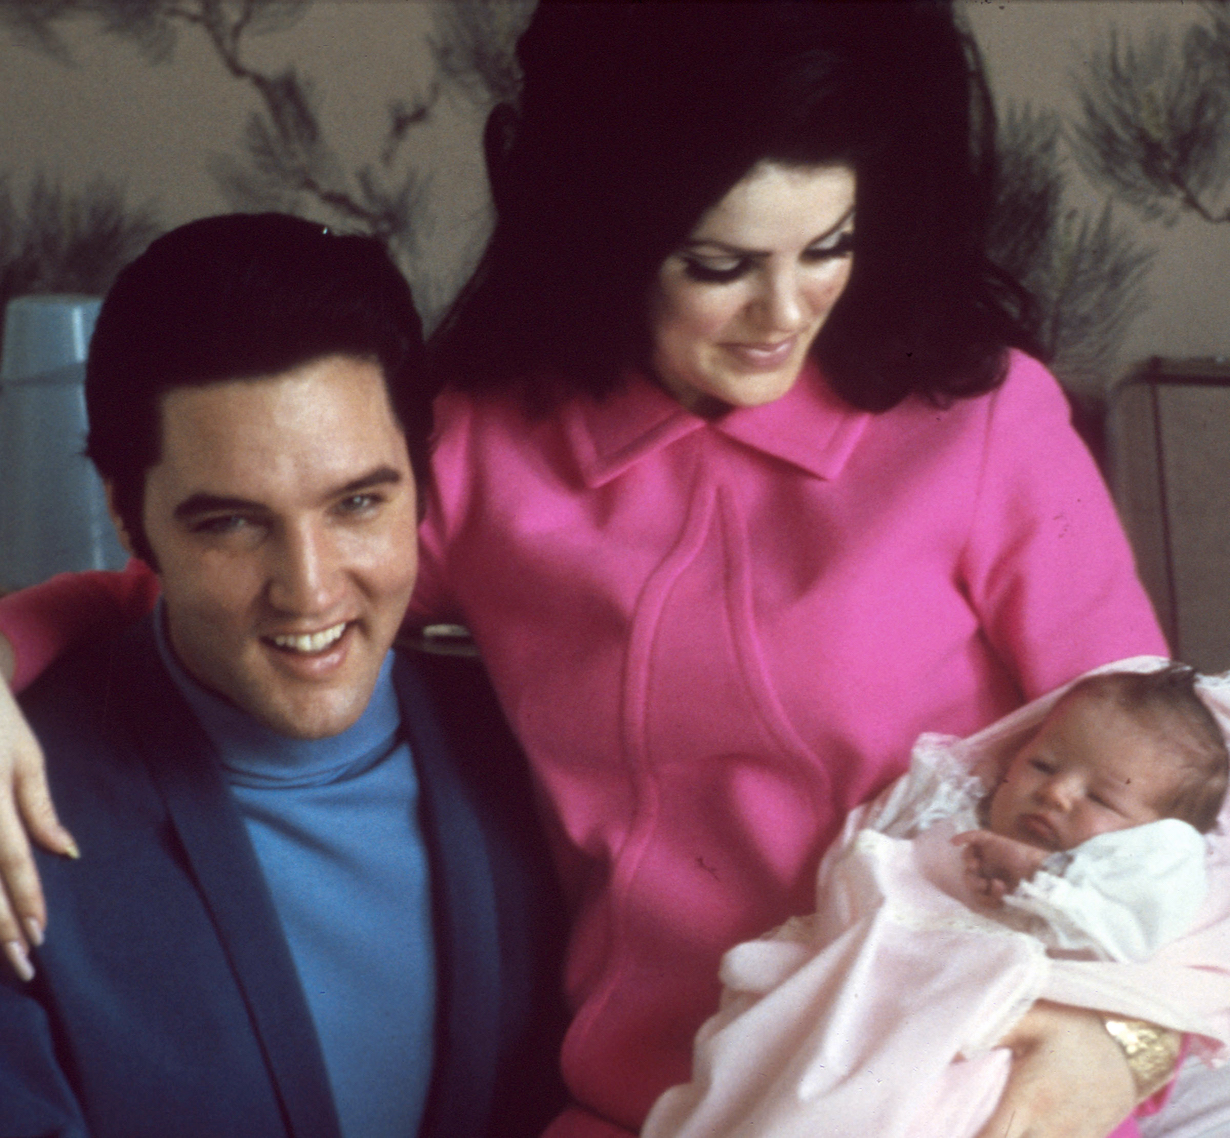 Rock and roll singer Elvis Presley with his wife Priscilla Beaulieu Presley and their 4 day old daughter Lisa Marie Presley